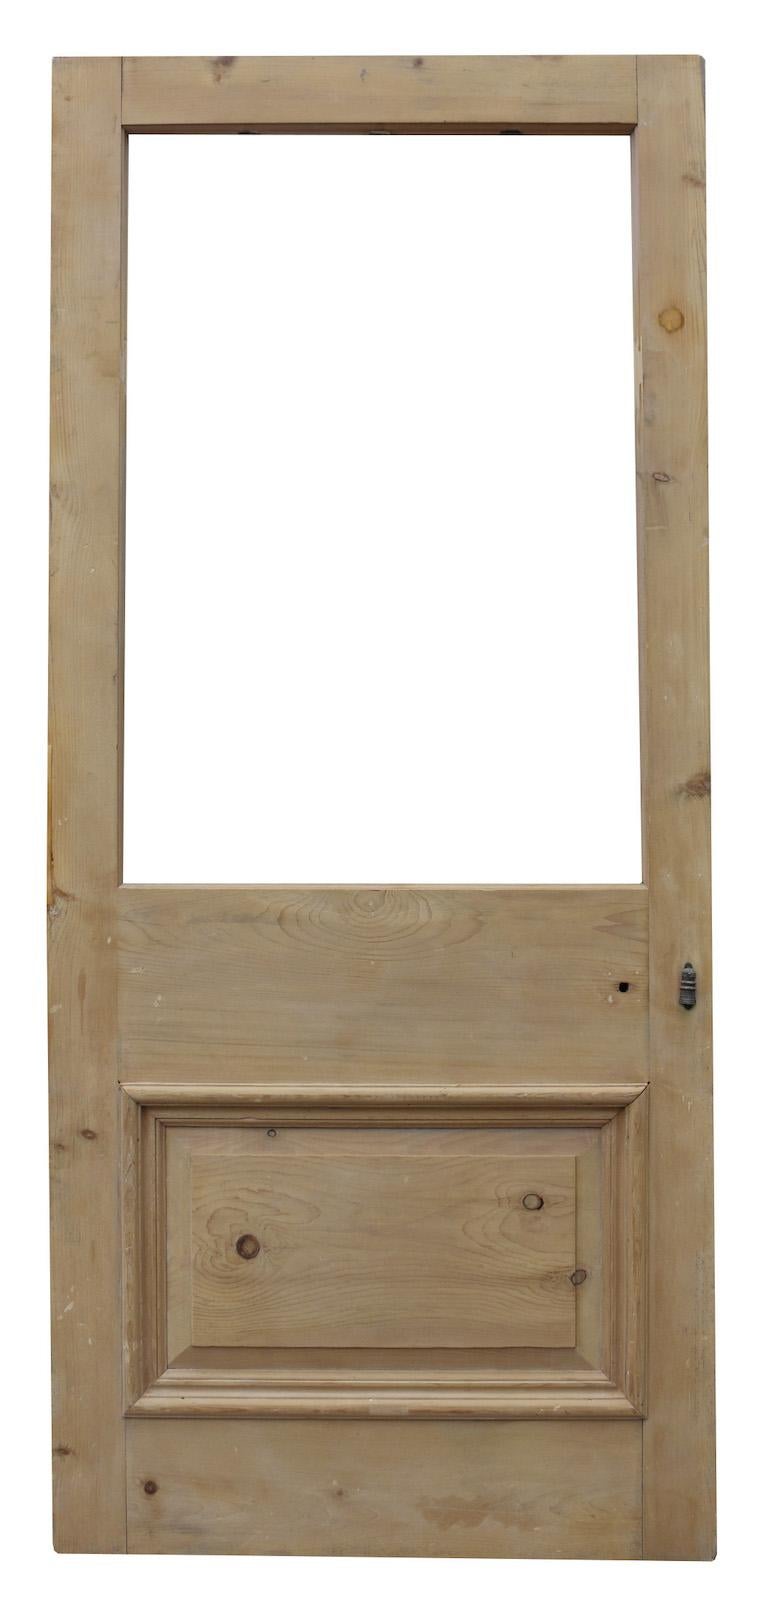 A reclaimed exterior door of two panel configuration, with space for glass.